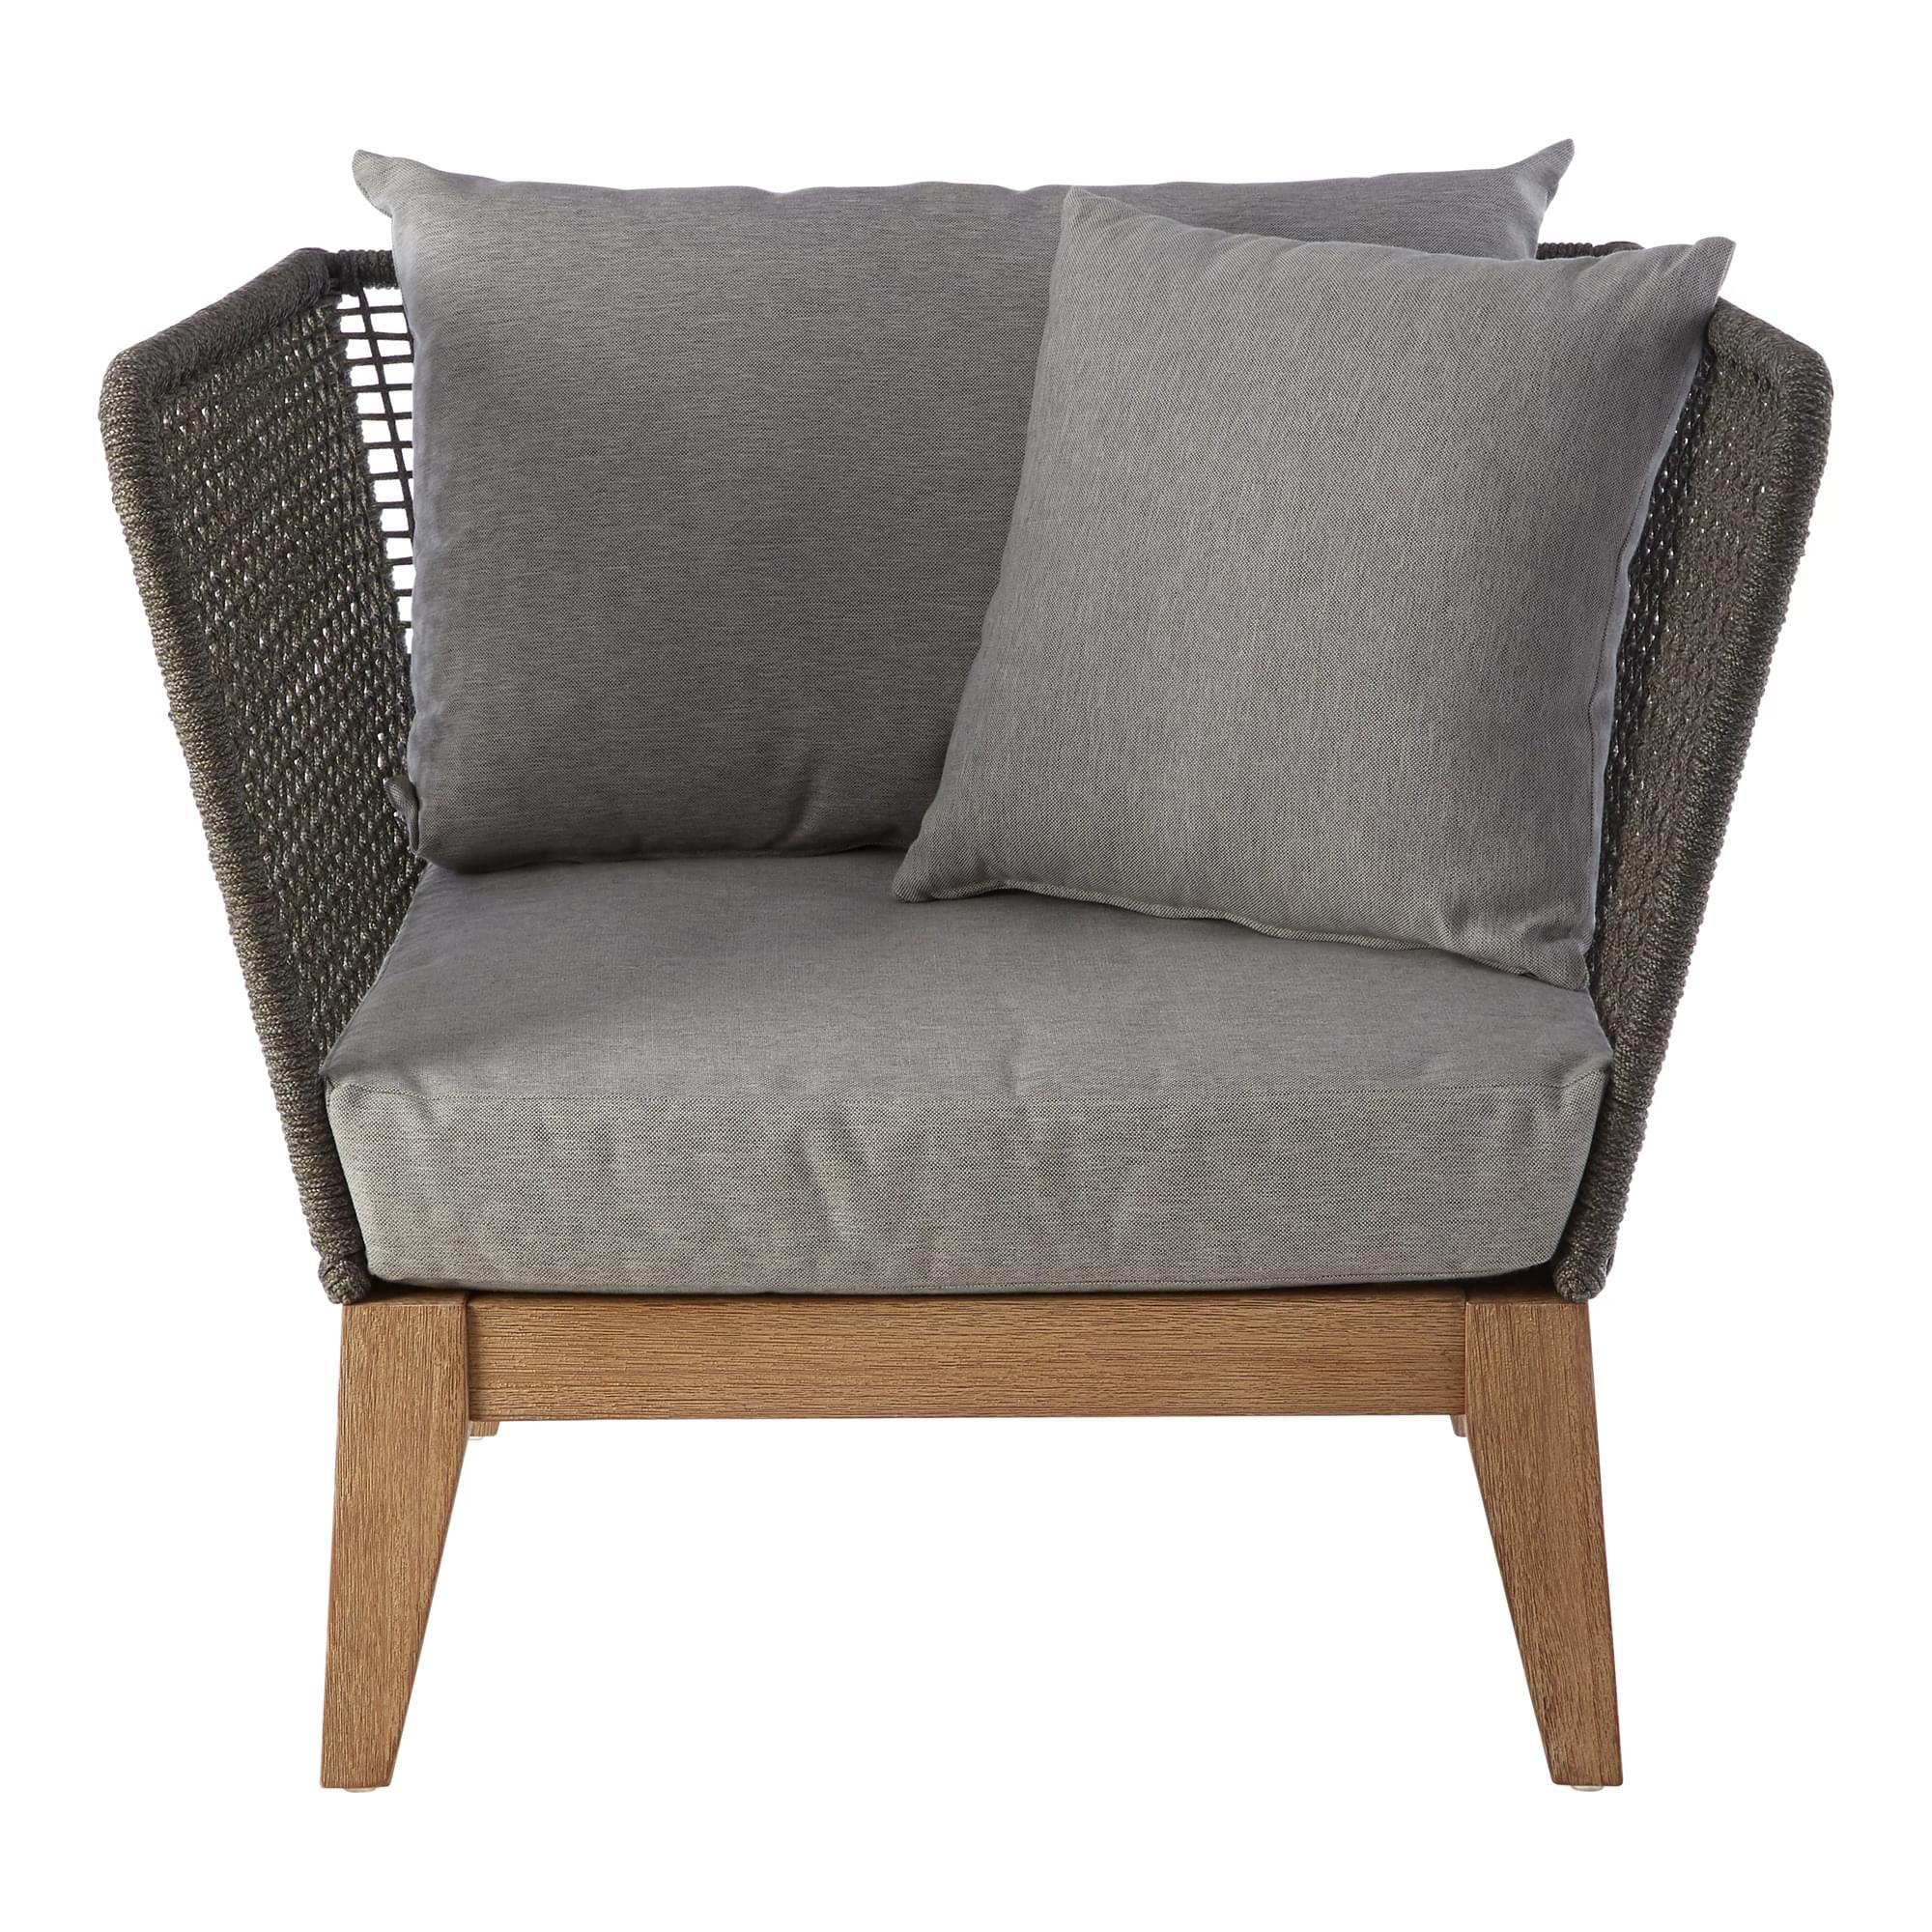 Interiors by Premier Grey Armchair, Arm and Backrest Chair for Living Room, High-quality Bedroom Cha